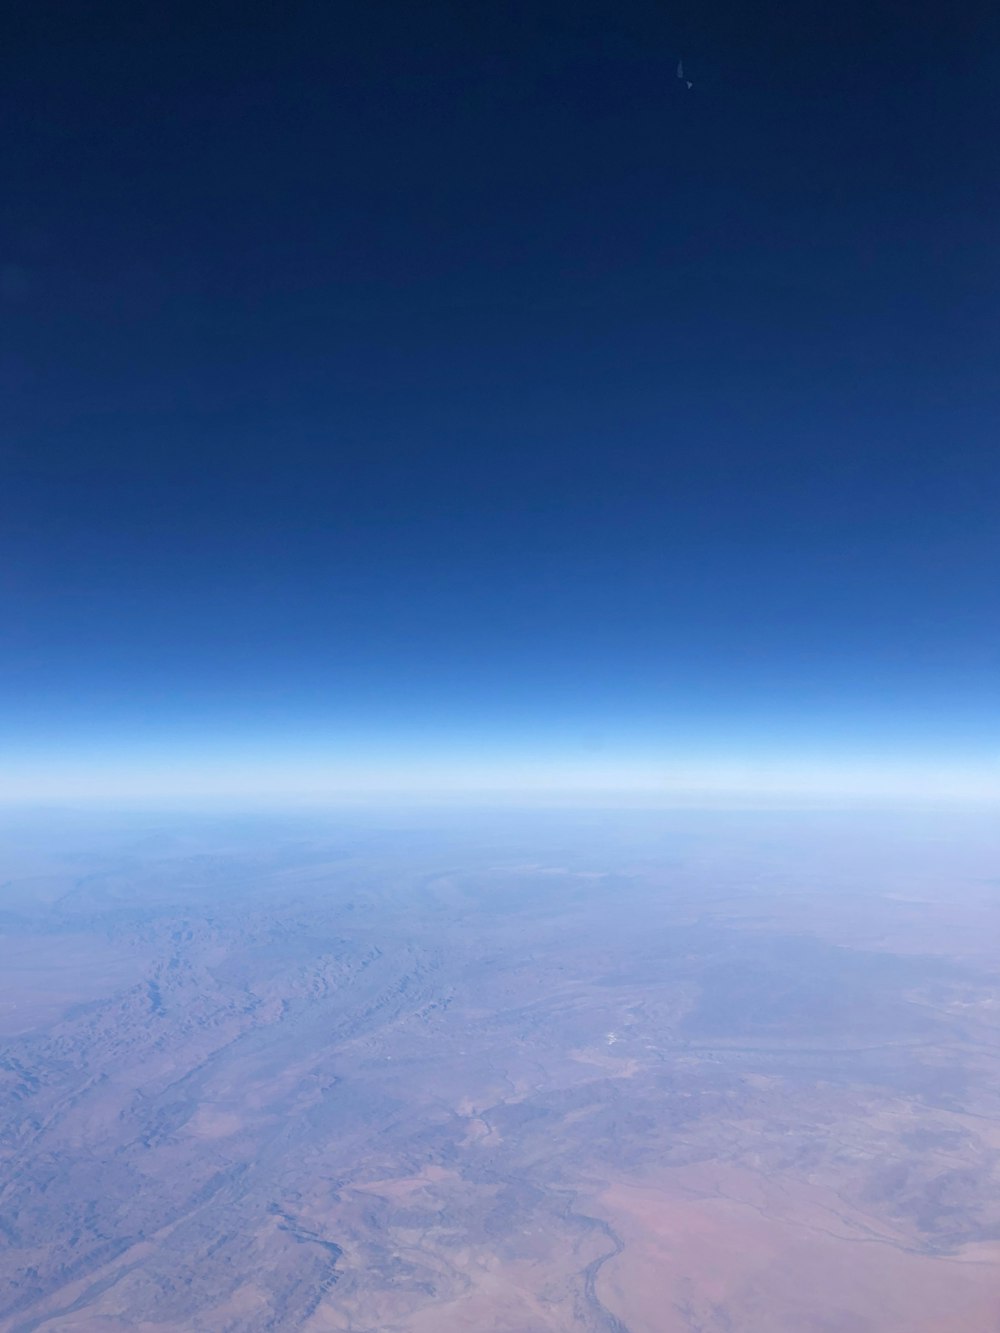 a view of the earth from an airplane